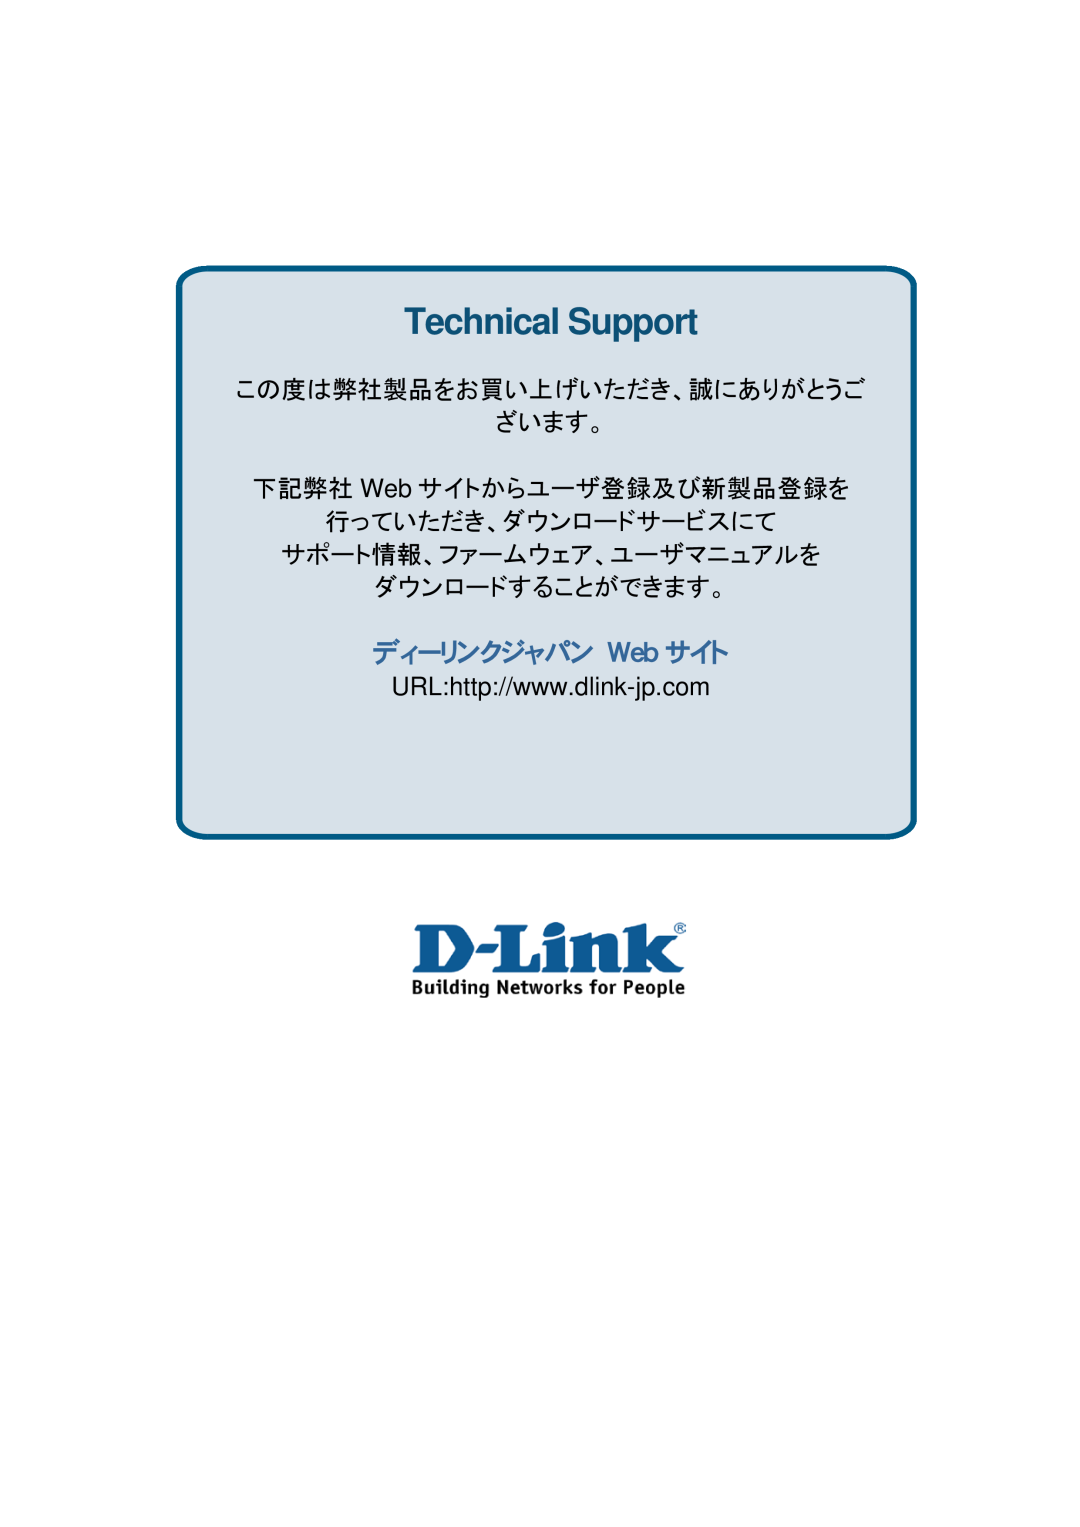 D-Link ethernet managed switch manual Technical Support, ディーリンクジャパン Web サイト 